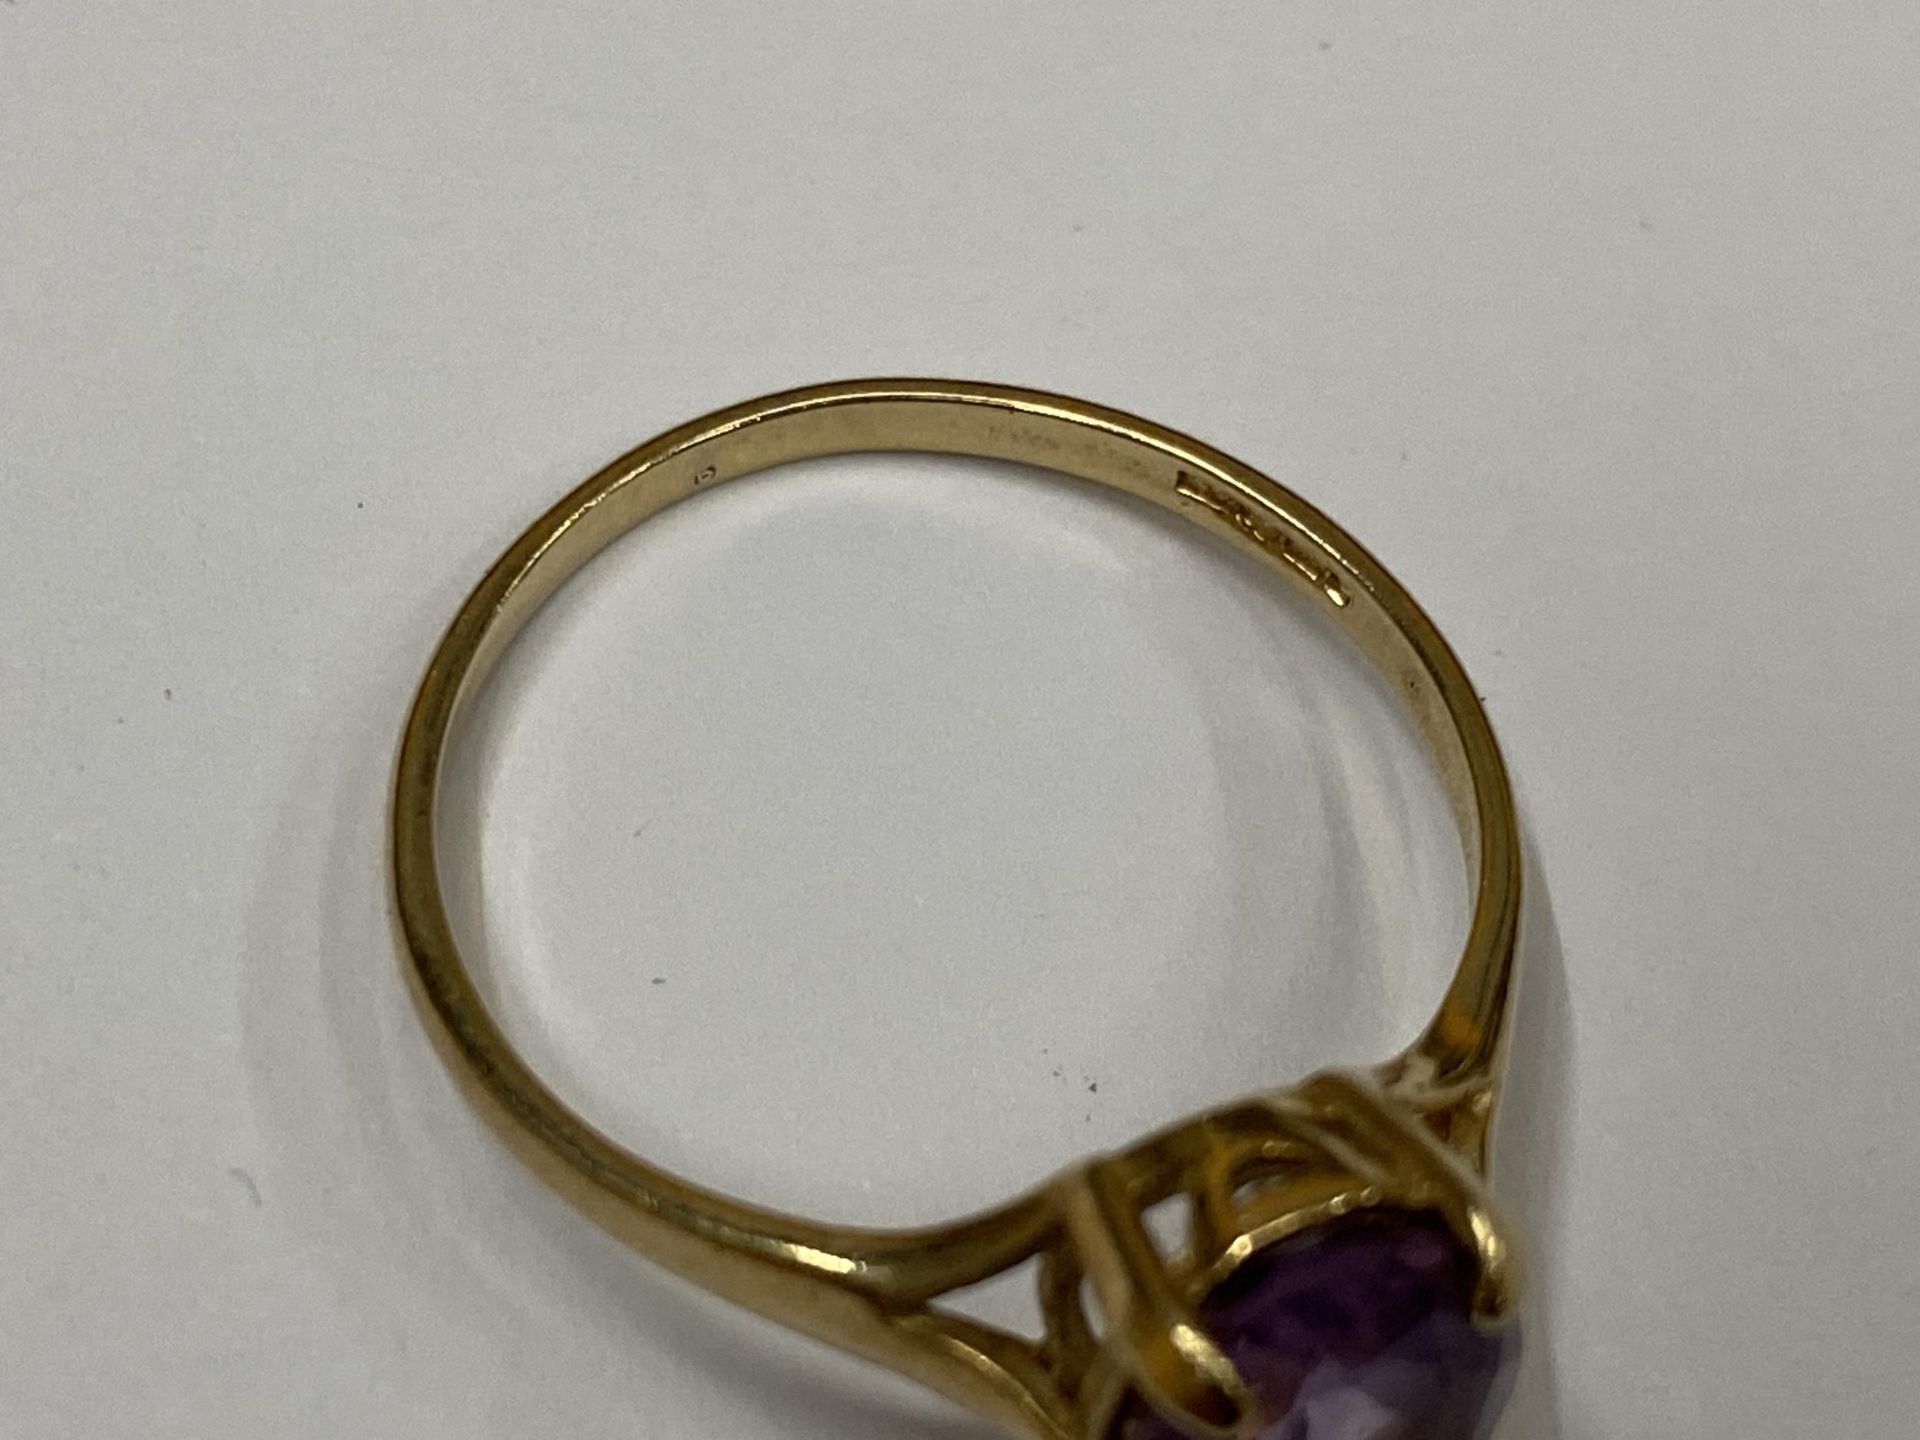 A 9CT YELLOW GOLD RING WITH SINGLE PURPLE STONE, WEIGHT 1.8G - Image 2 of 2